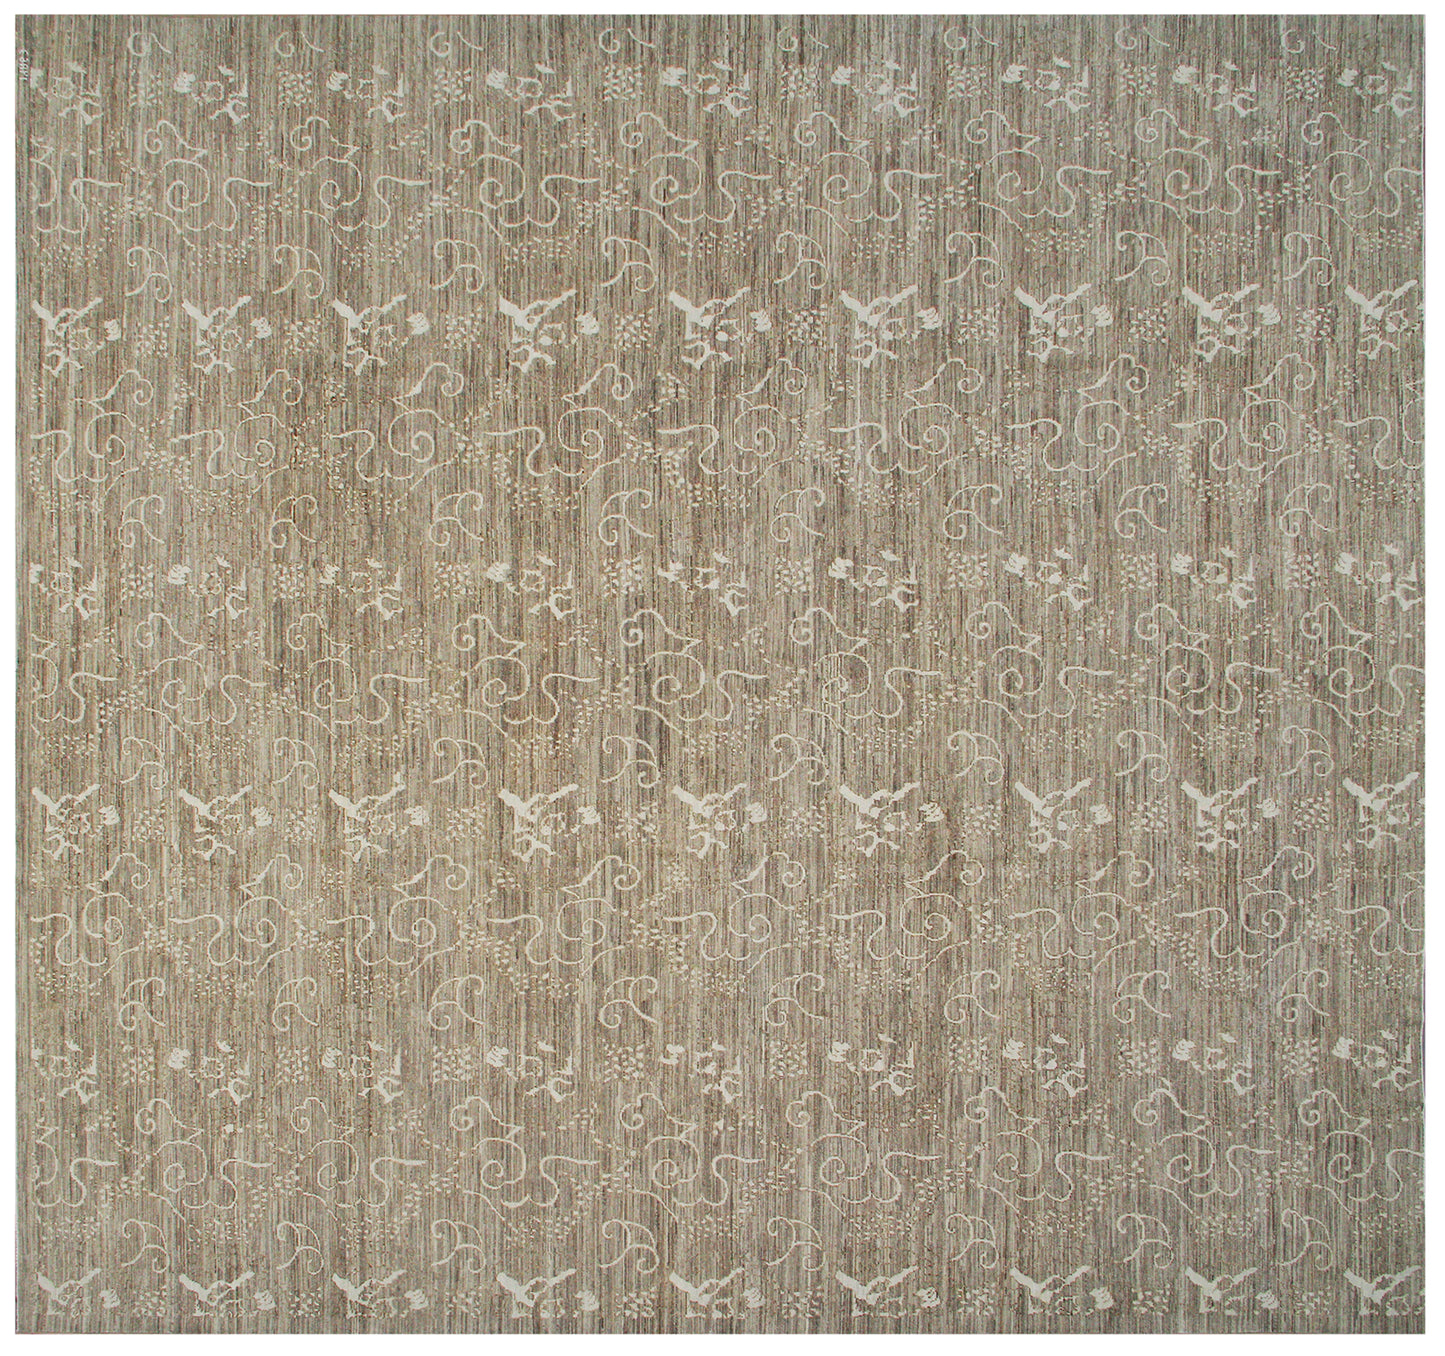 10.0 x 9.0 Muted Soft Colored Asian Design Hand Knotted Ariana Area Rug